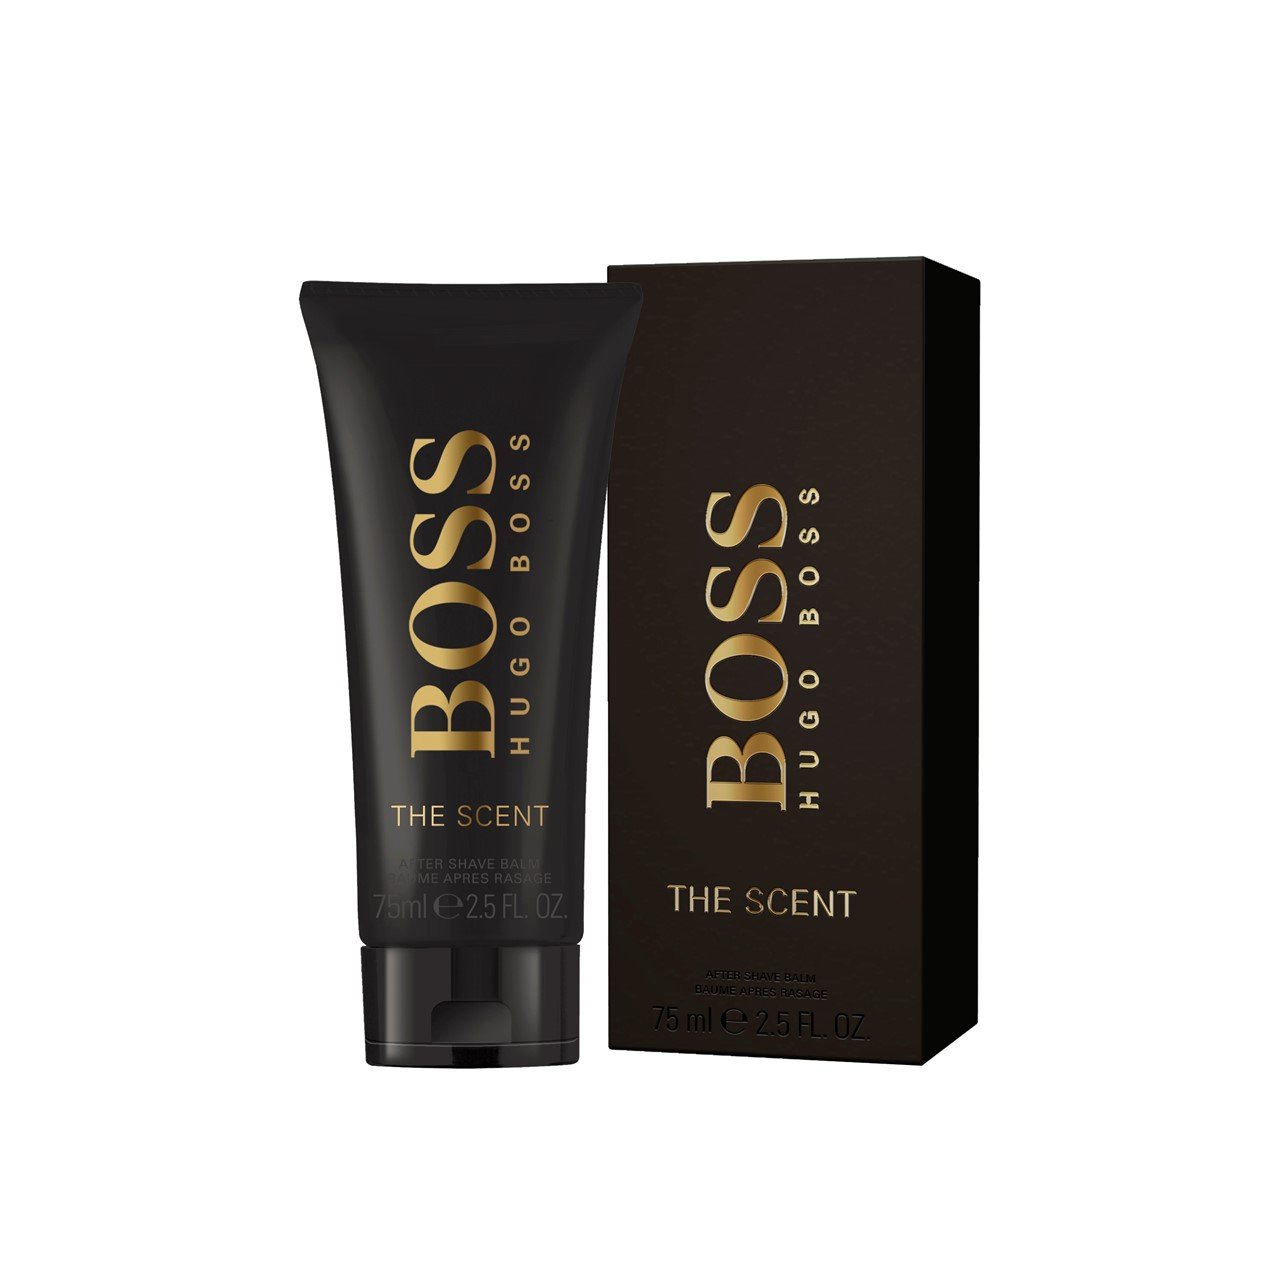 boss after shave balm